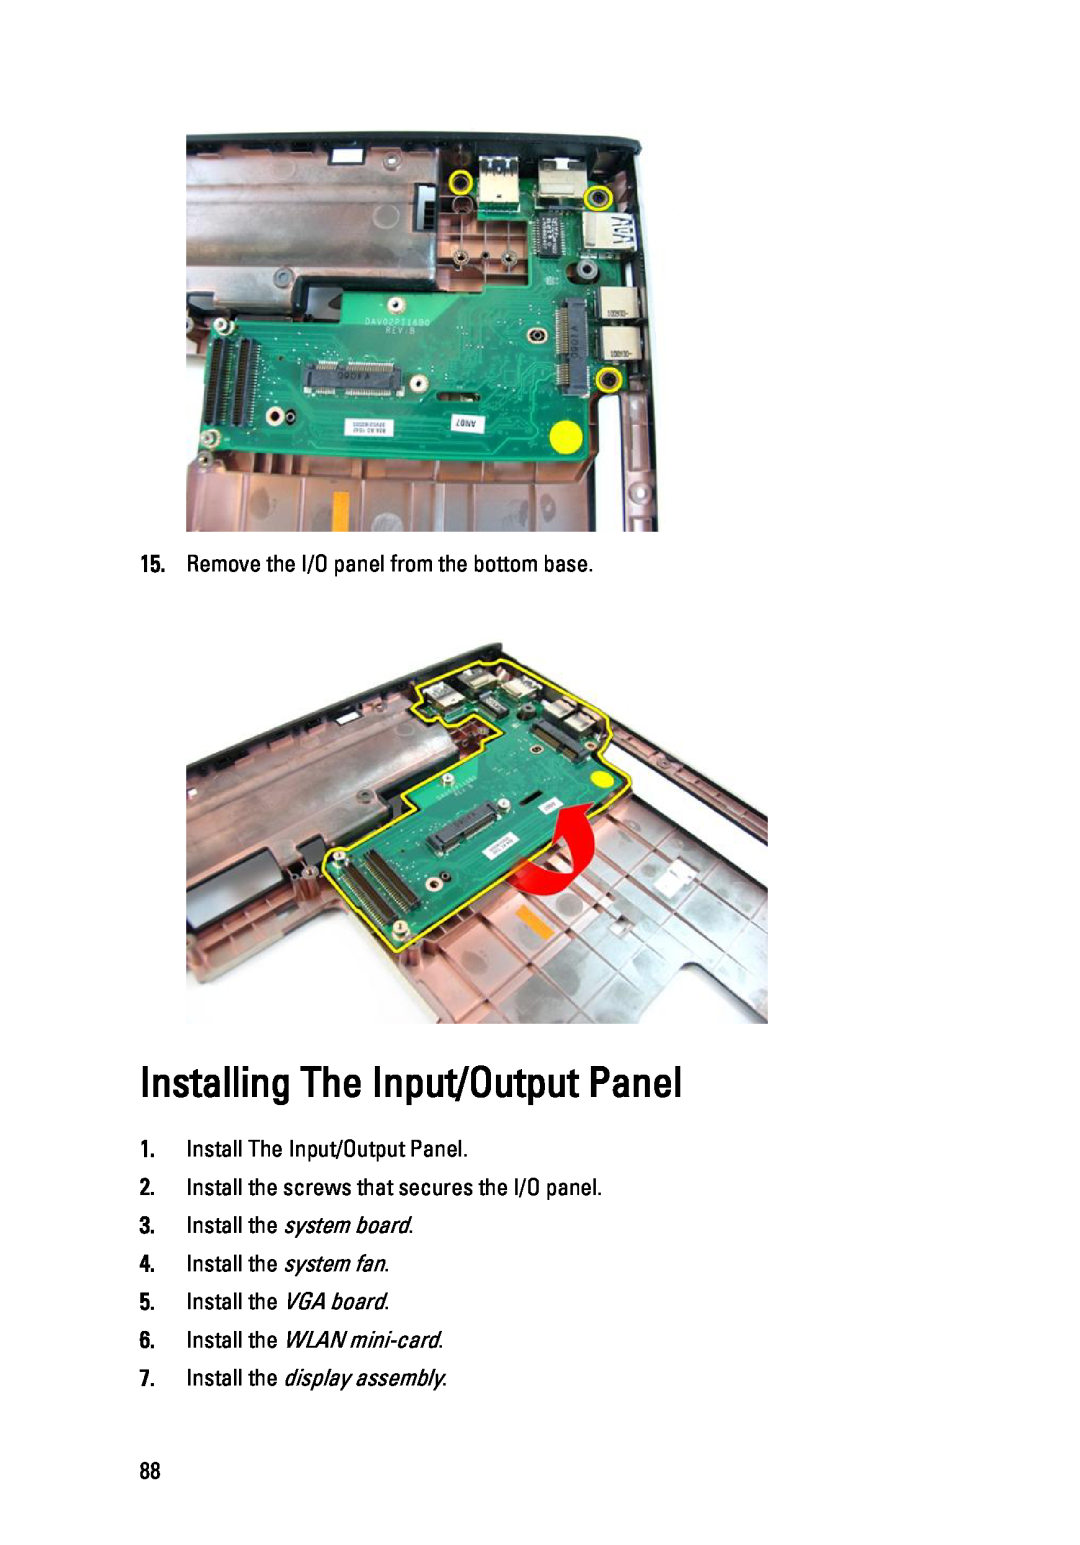 Dell 3450 Installing The Input/Output Panel, Remove the I/O panel from the bottom base, Install The Input/Output Panel 